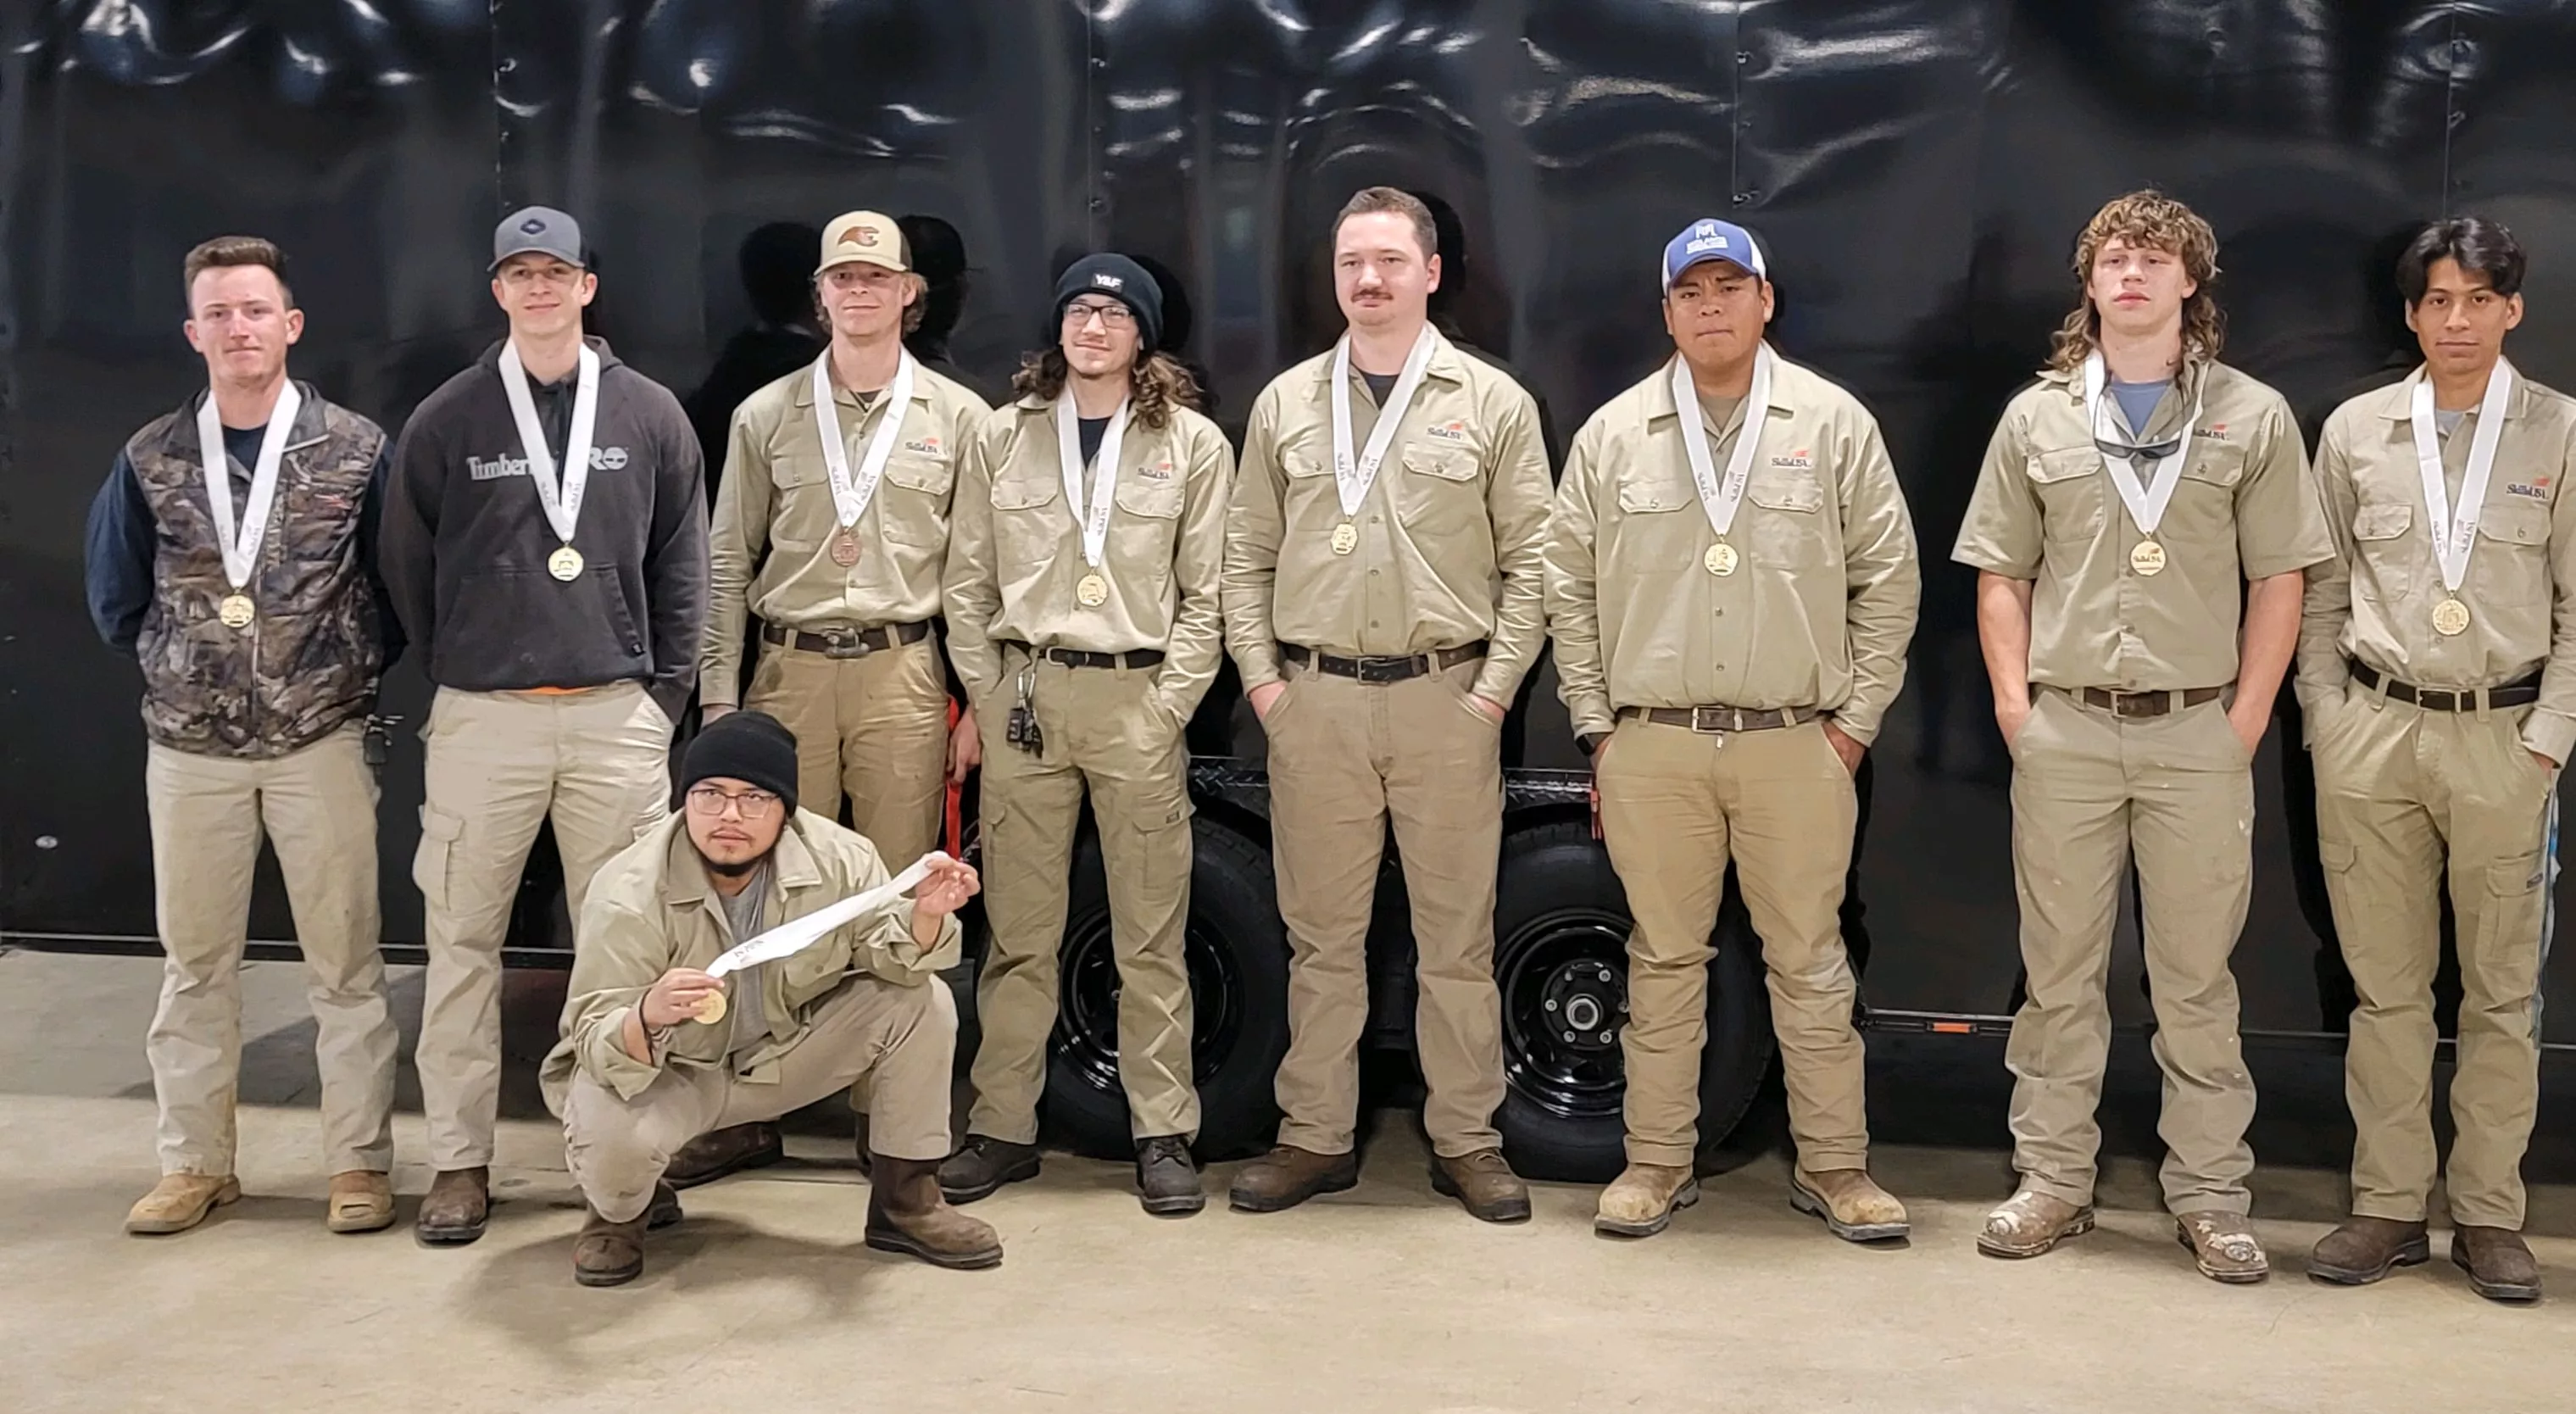 Building Construction Team standing together with their medals.